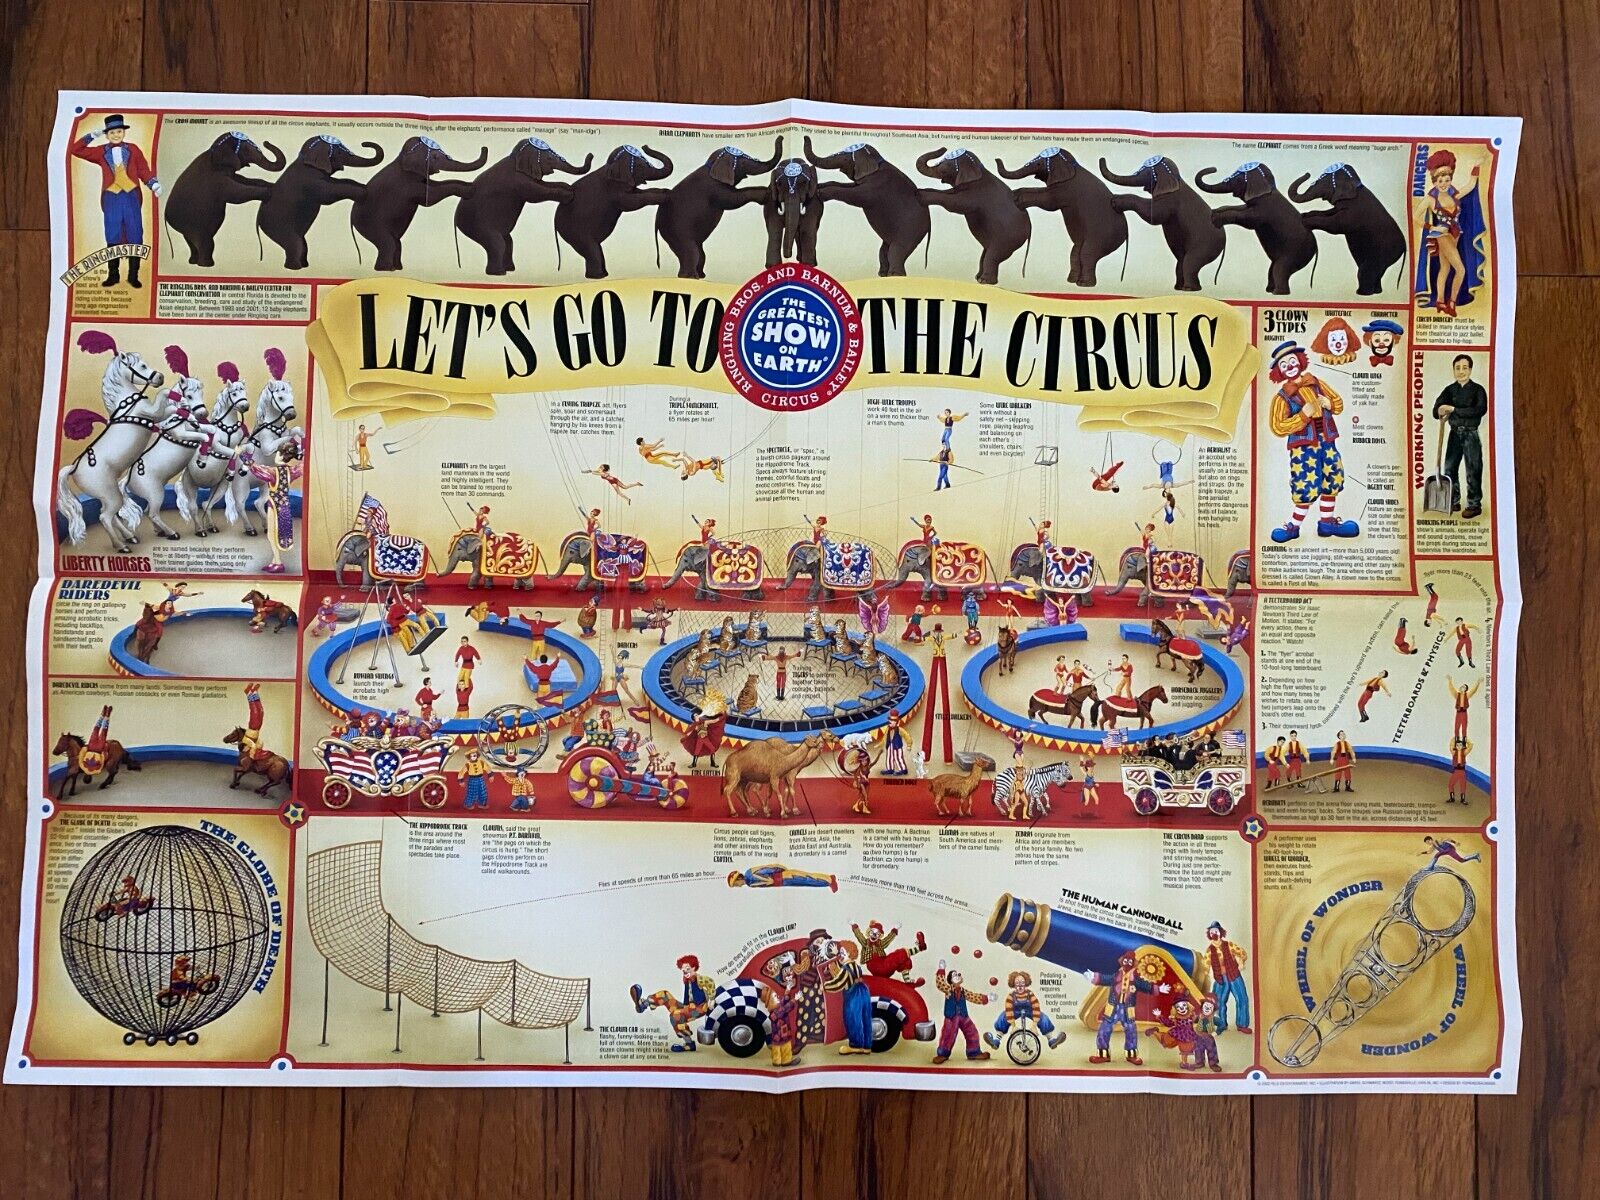 Authentic 2000 Ringling Bros Barnum & Bailey Circus Poster Publicist Edition